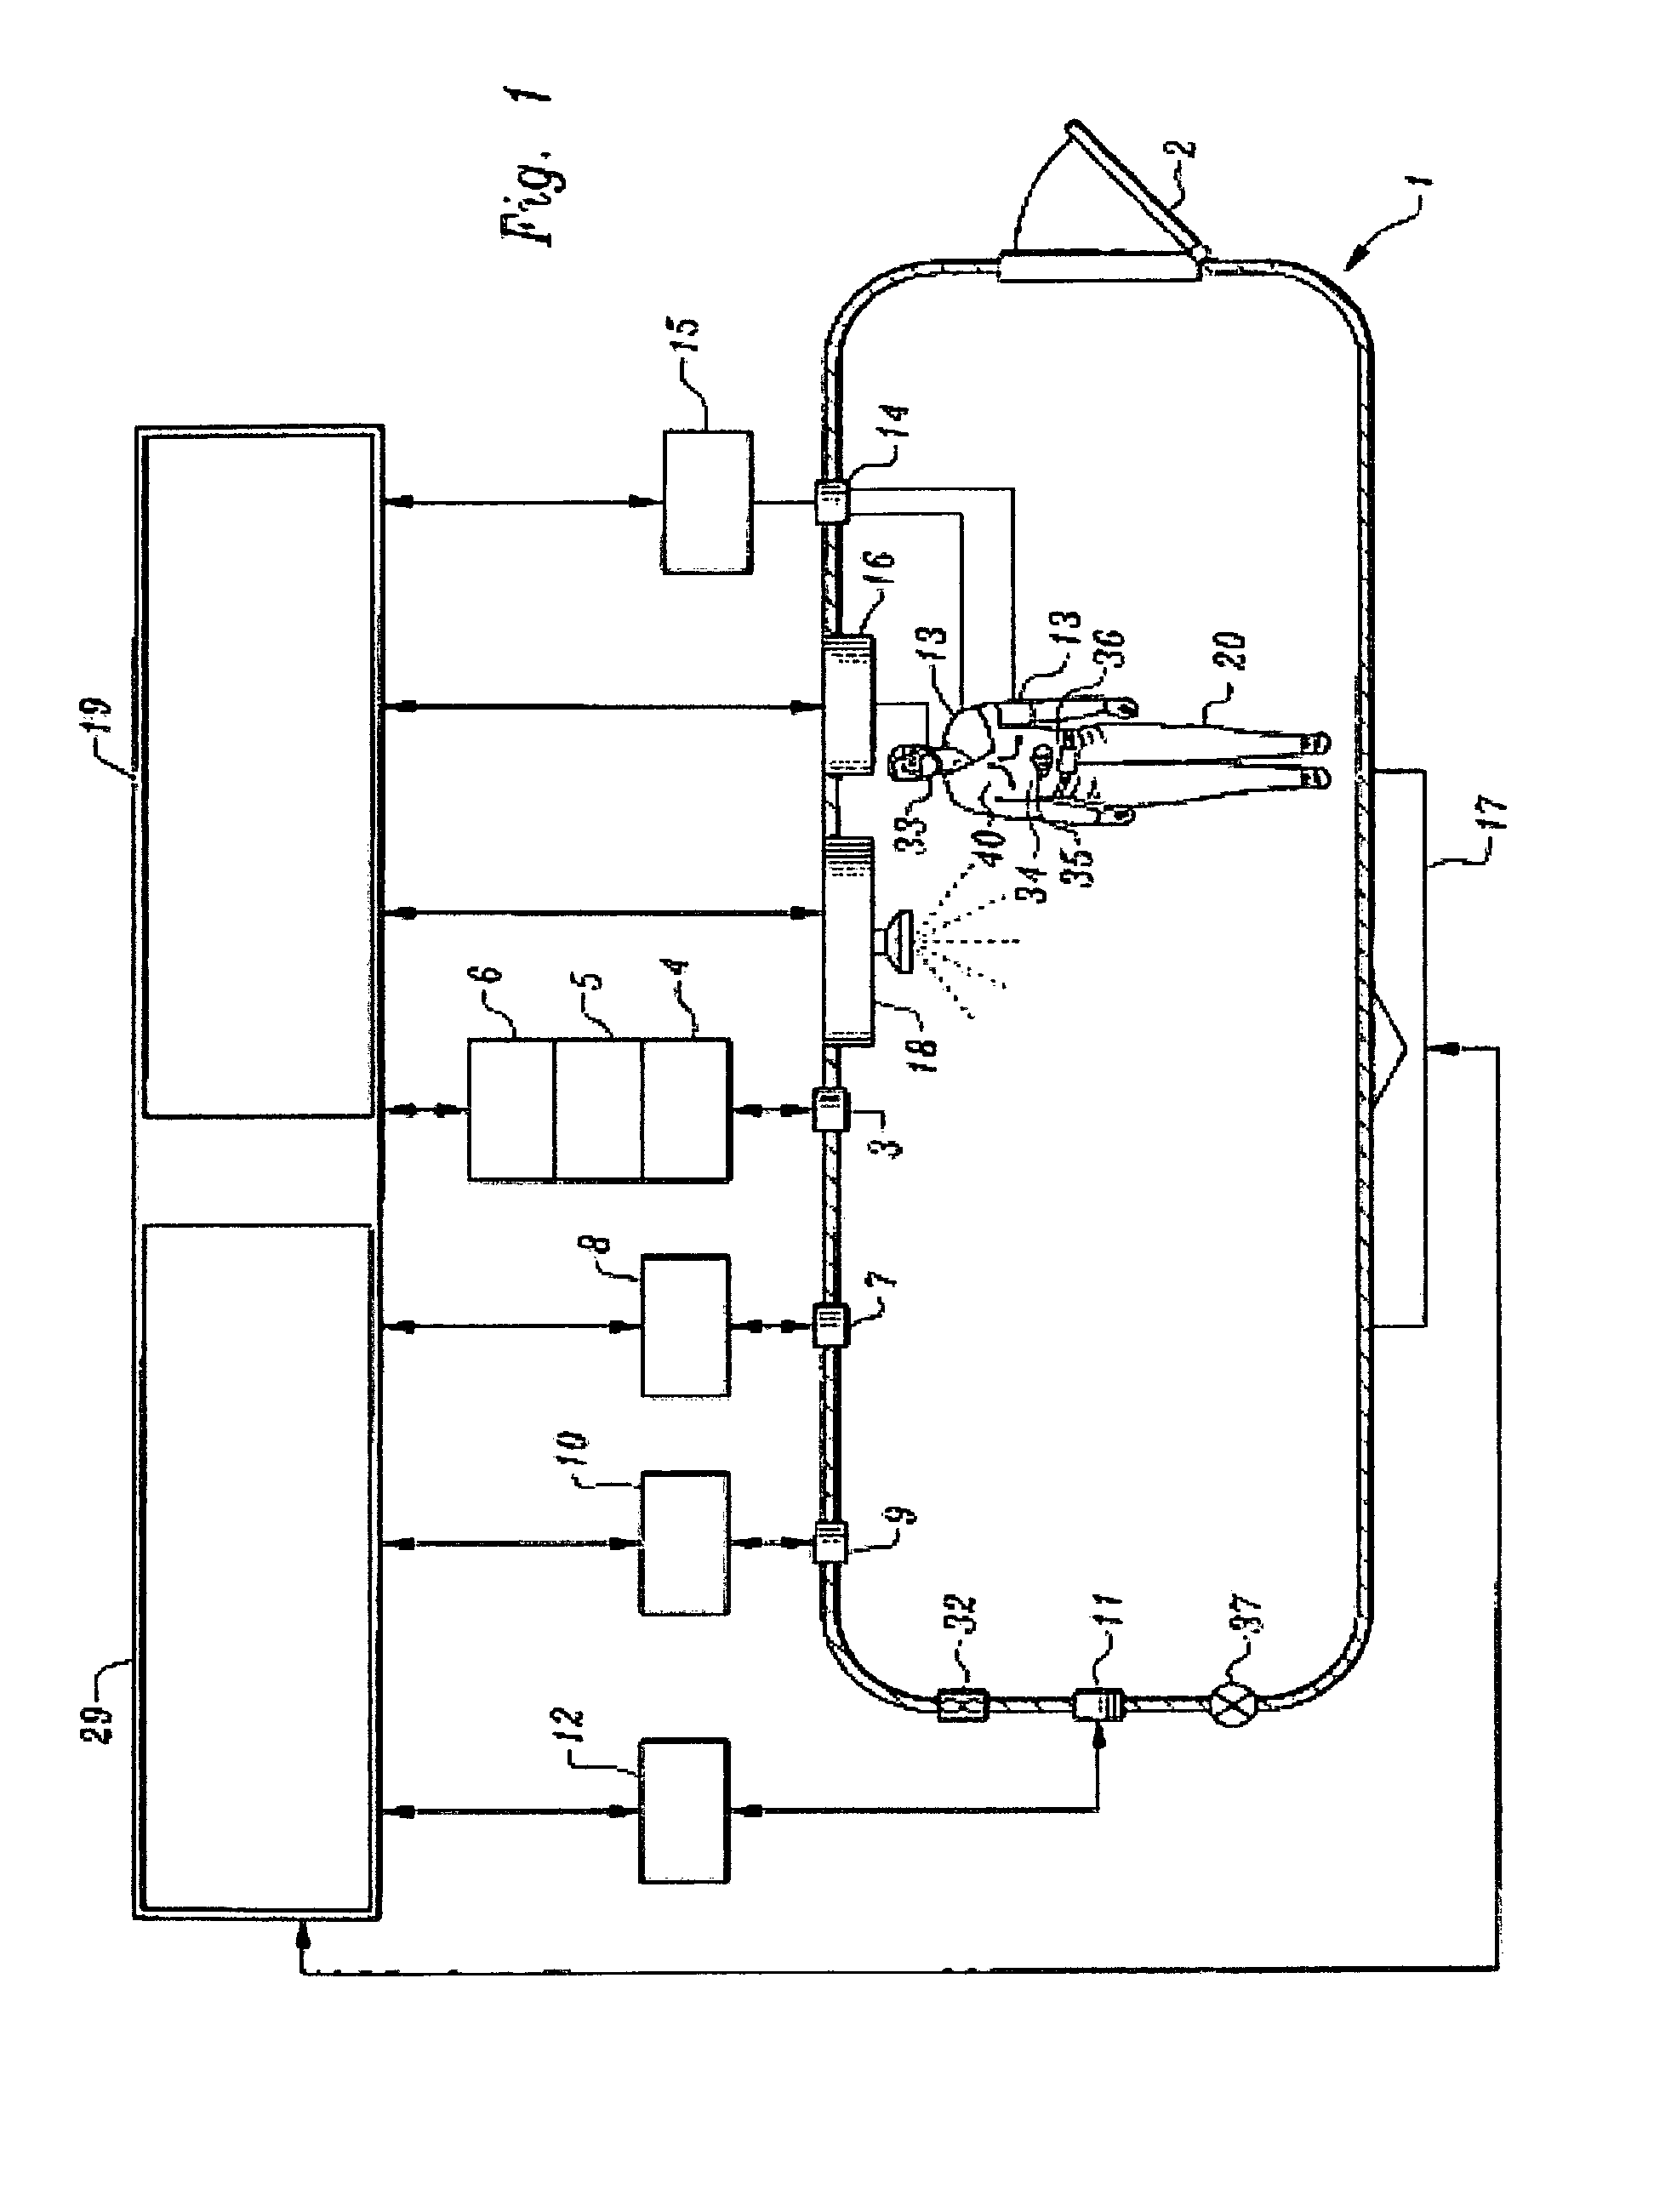 Apparatus and method for increasing, monitoring, measuring, and controlling perspiratory water and solid loss at reduced ambient pressure